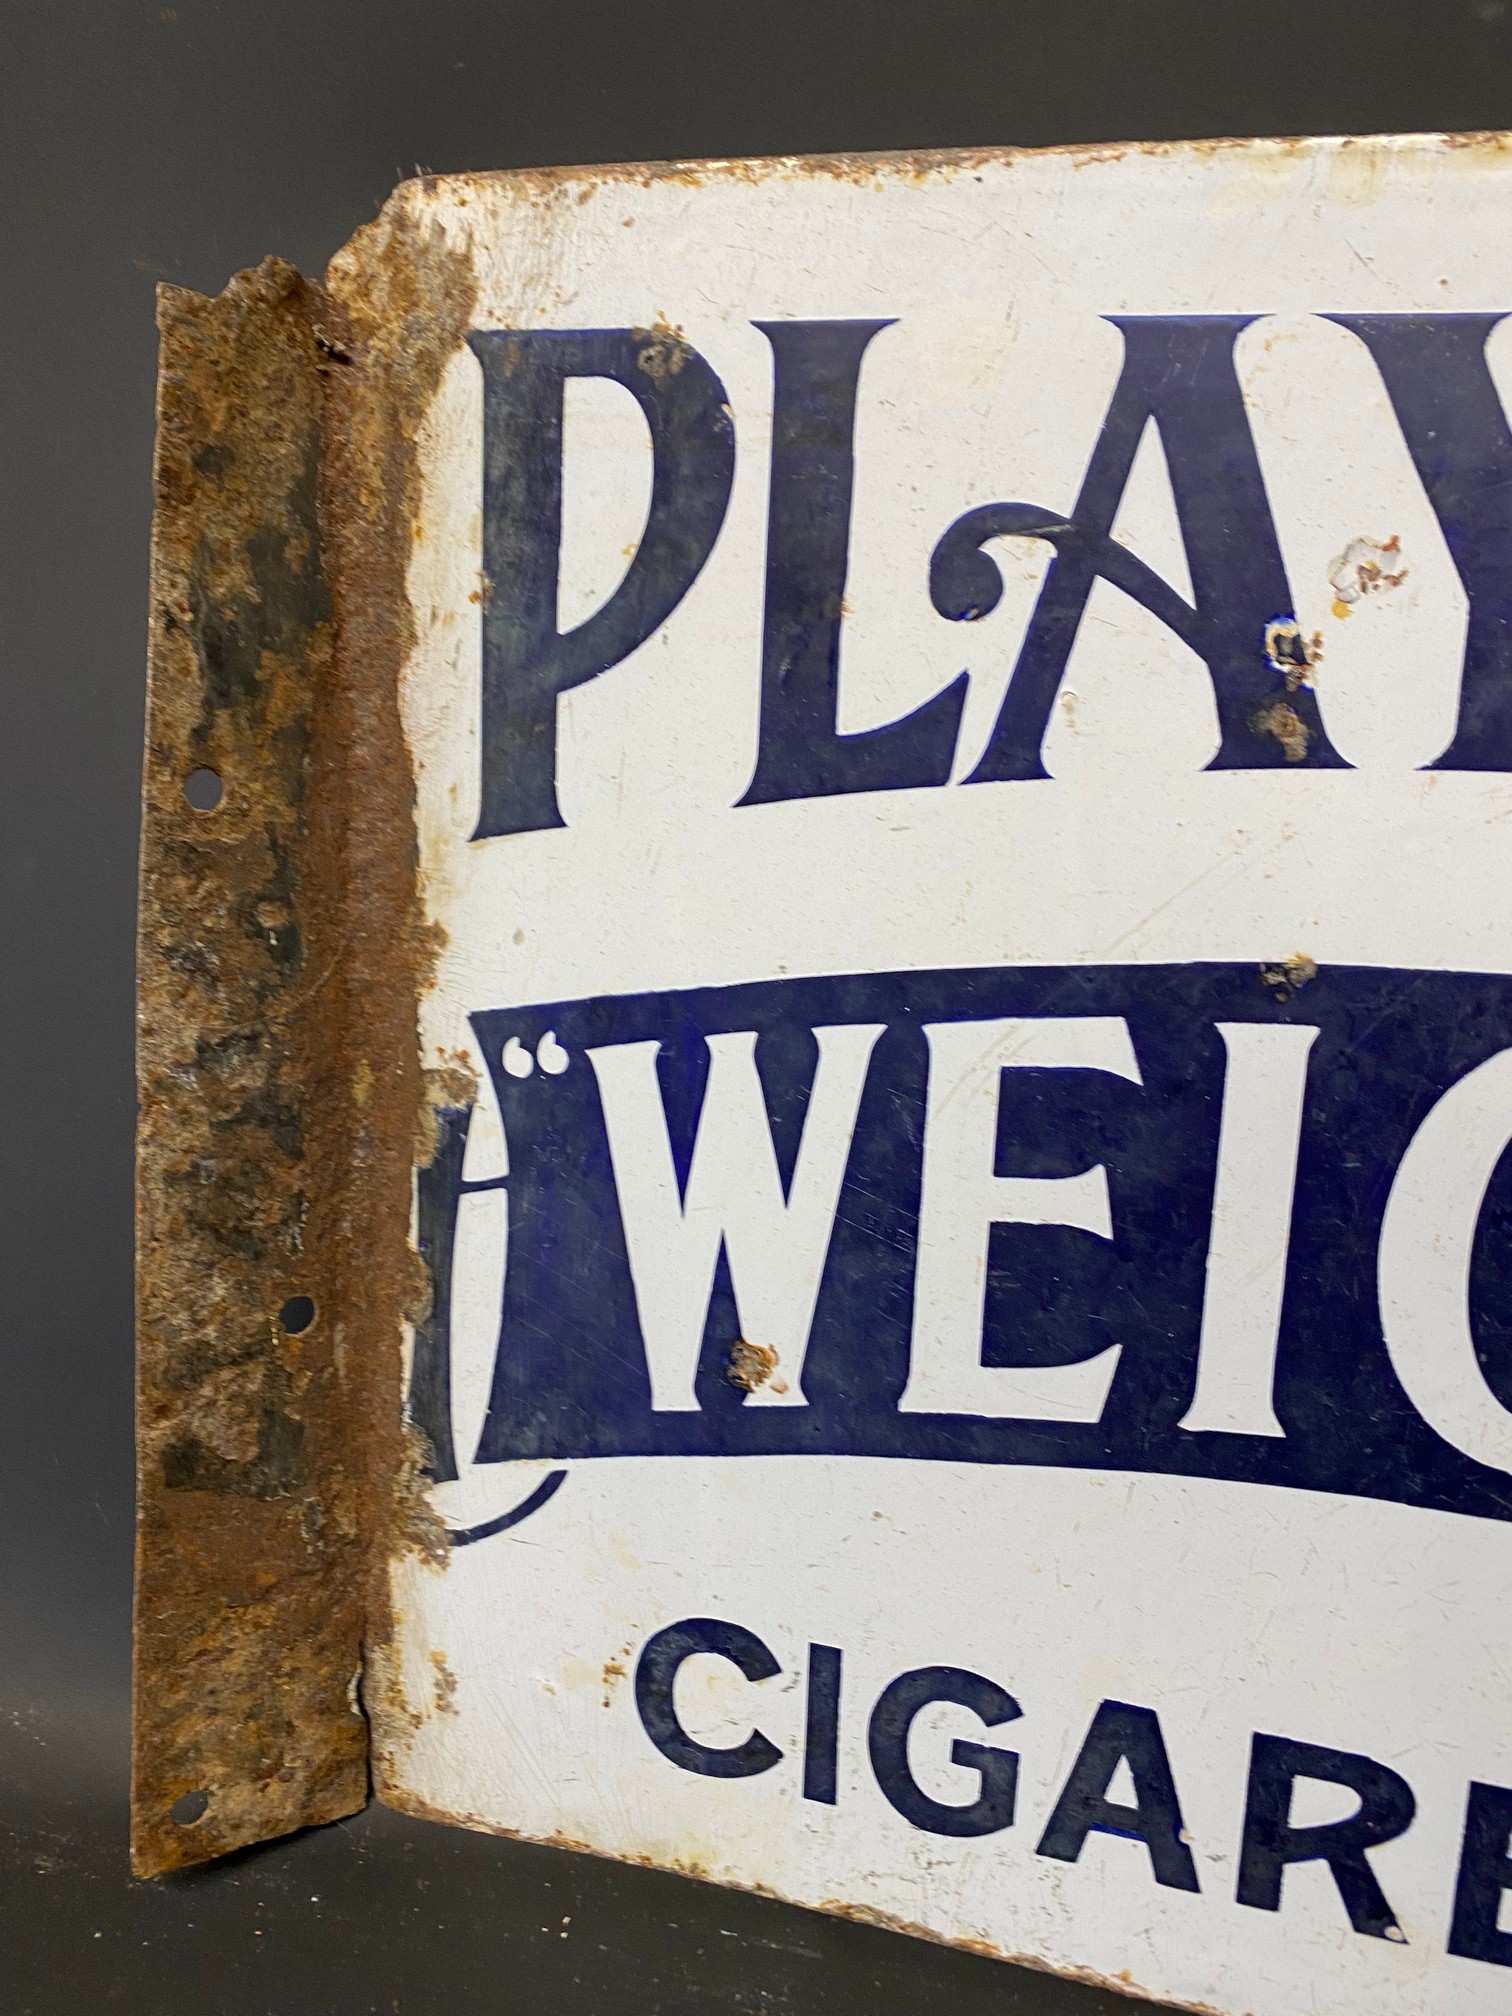 An early Player's Weights Cigarettes double sided enamel sign with hanging flange, by Wildman & - Image 4 of 6